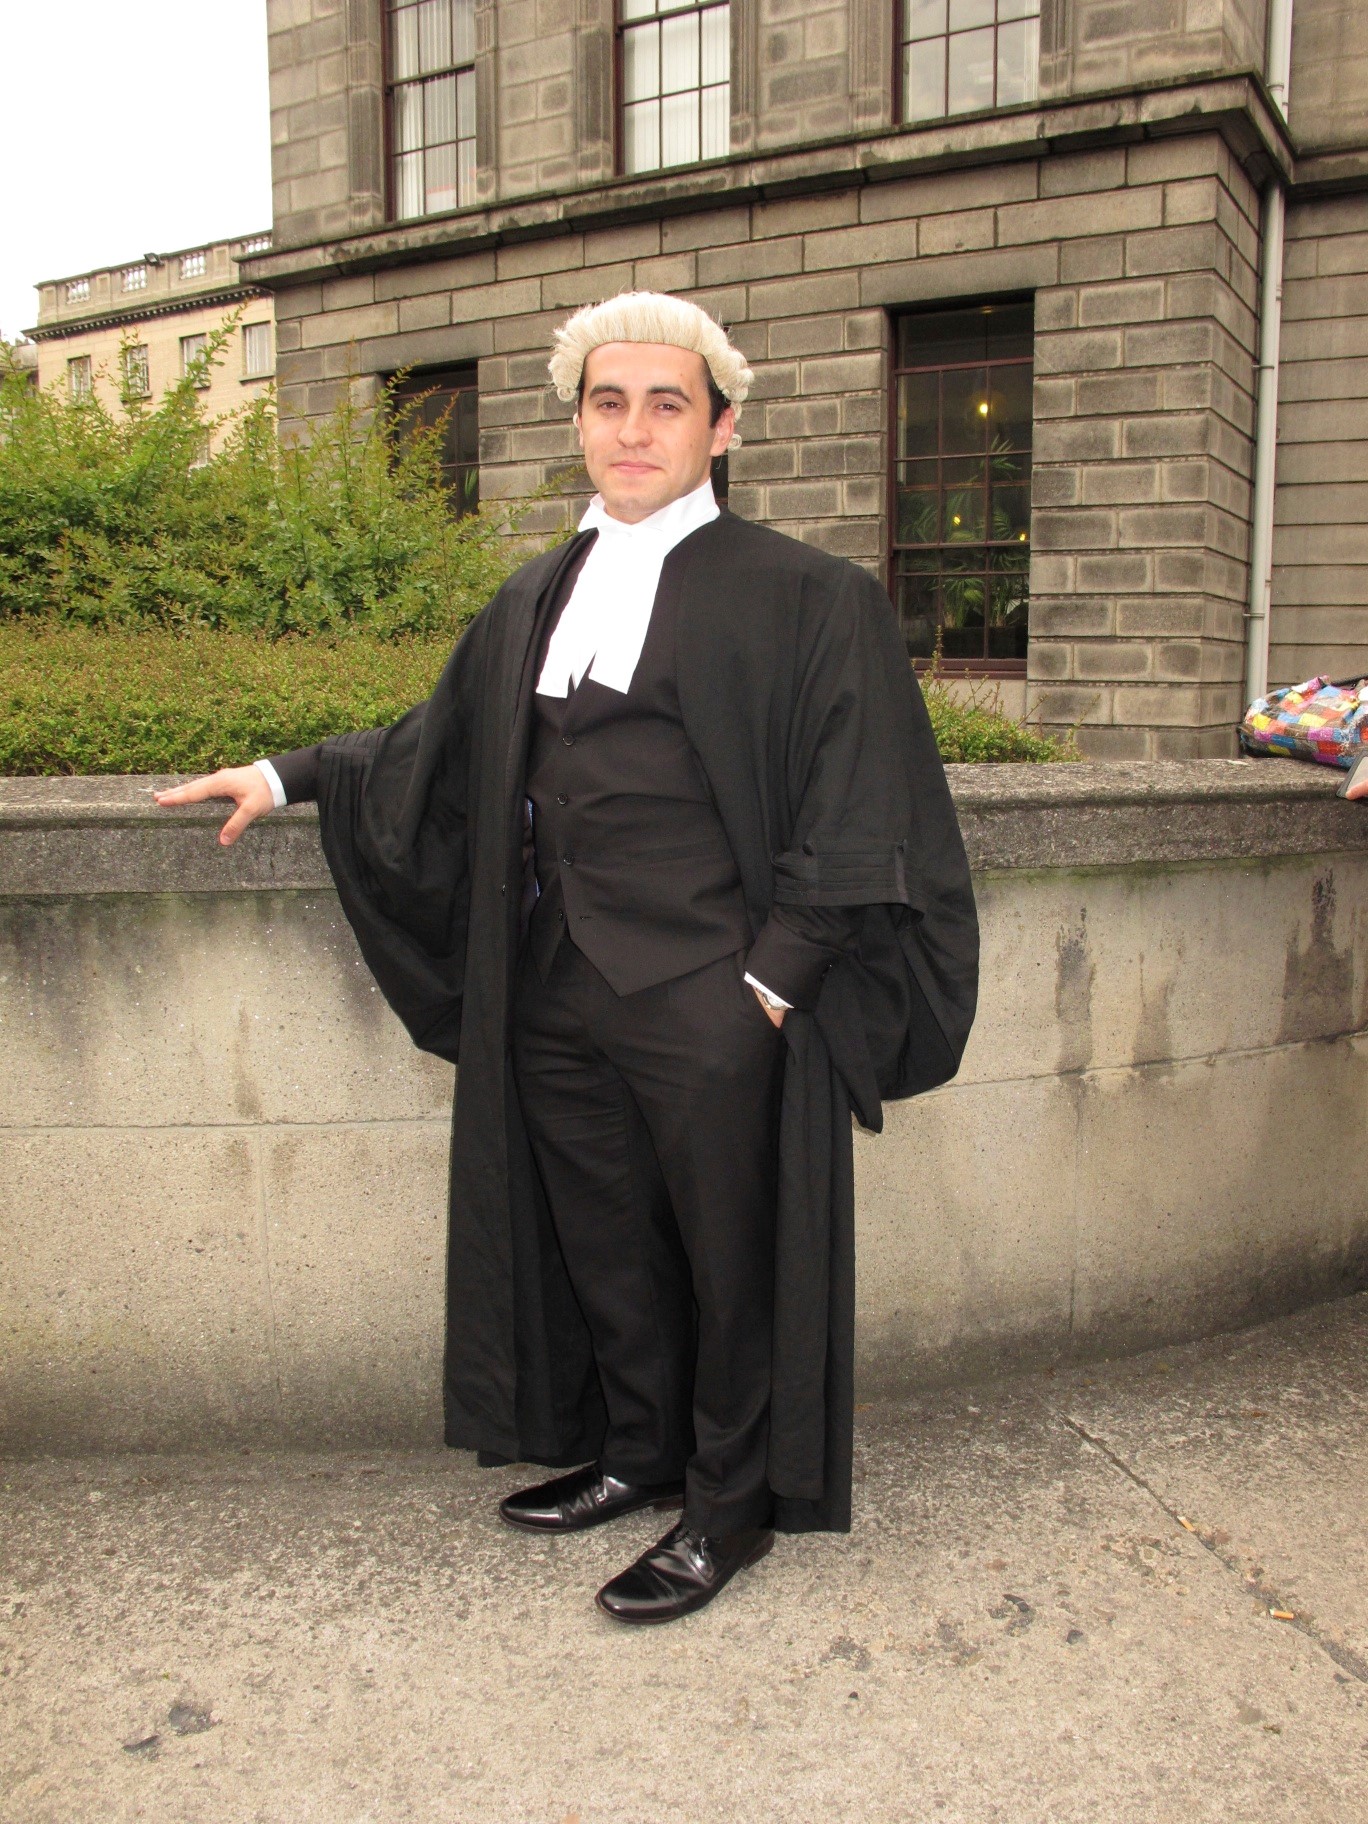 Man in barrister wig and robes